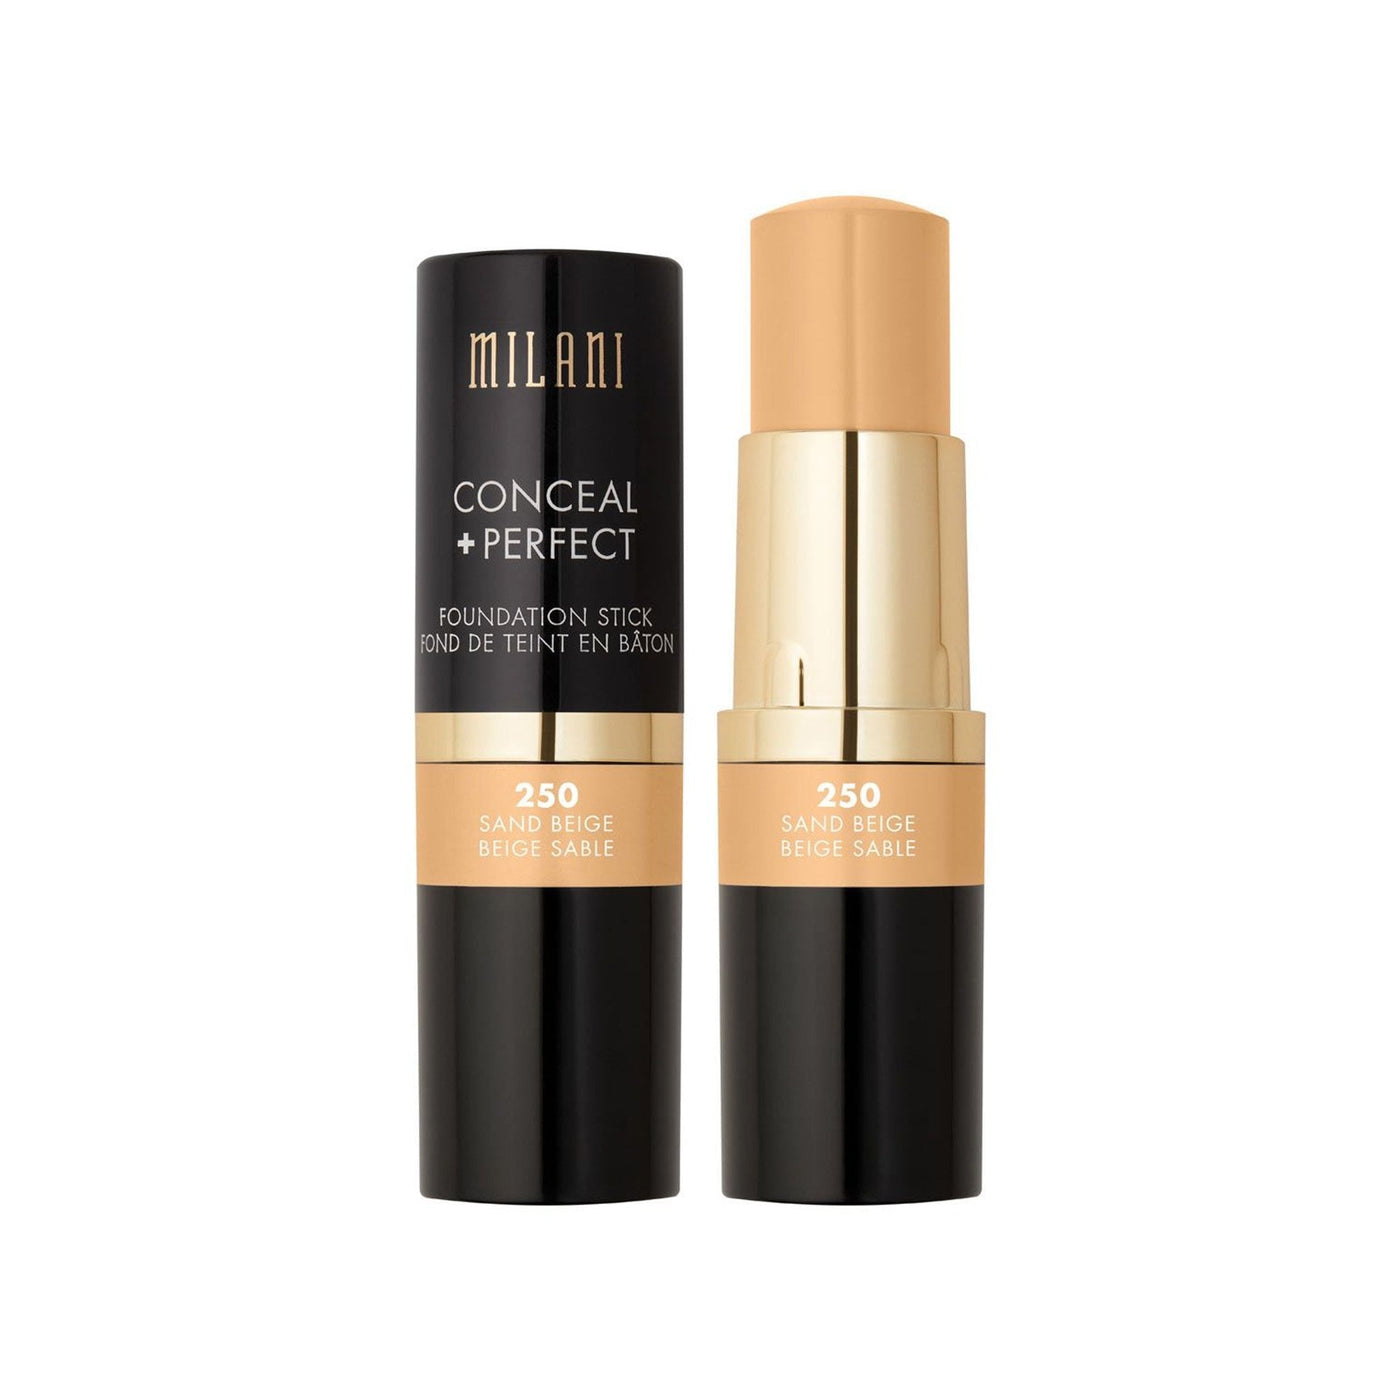 Milani Conceal + Perfect Foundation Stick 250 SAND BEIGE